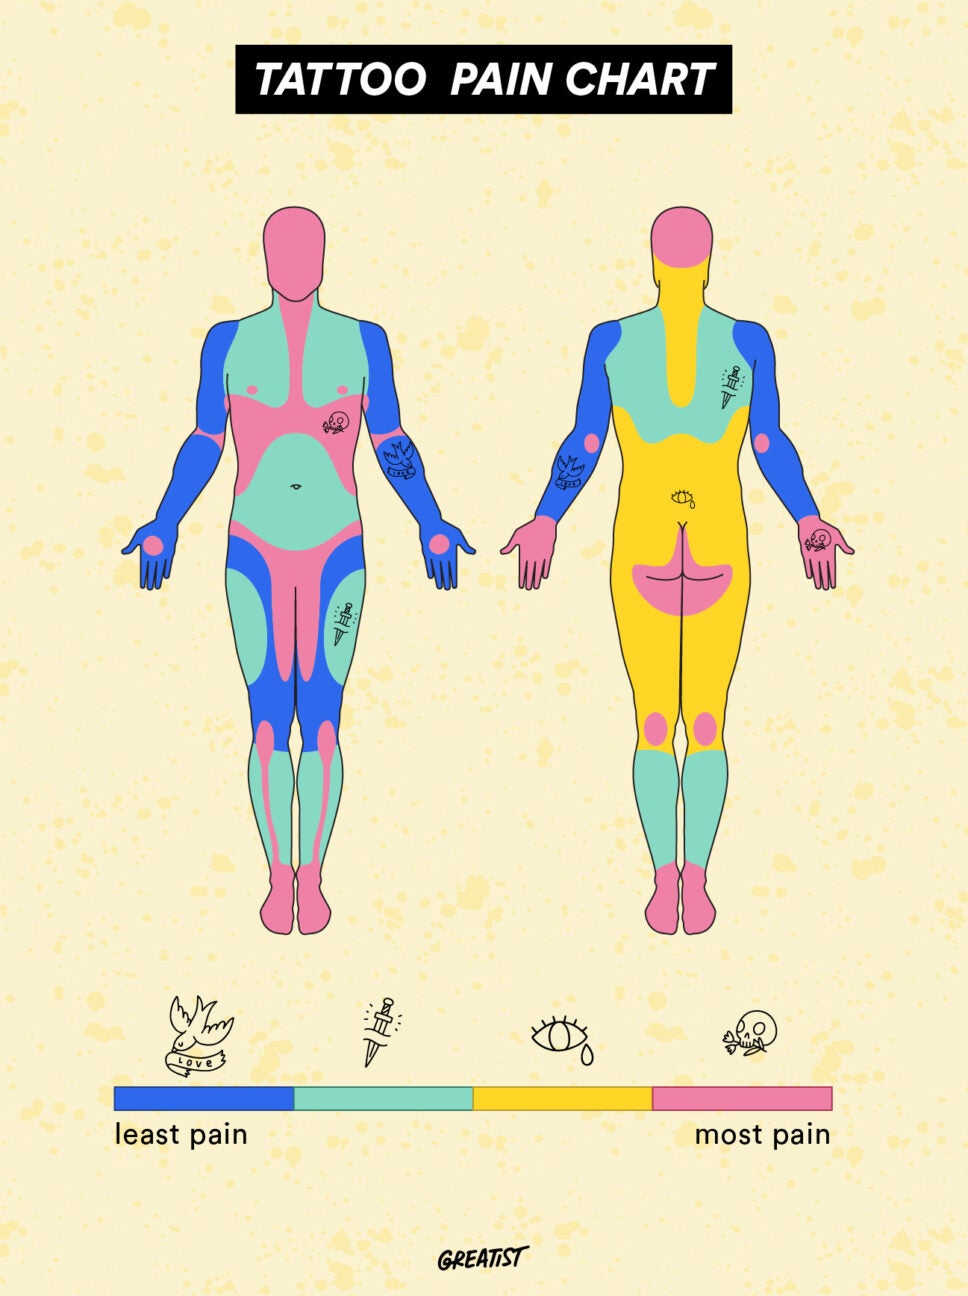 tattoo pain chart for people who are biologically